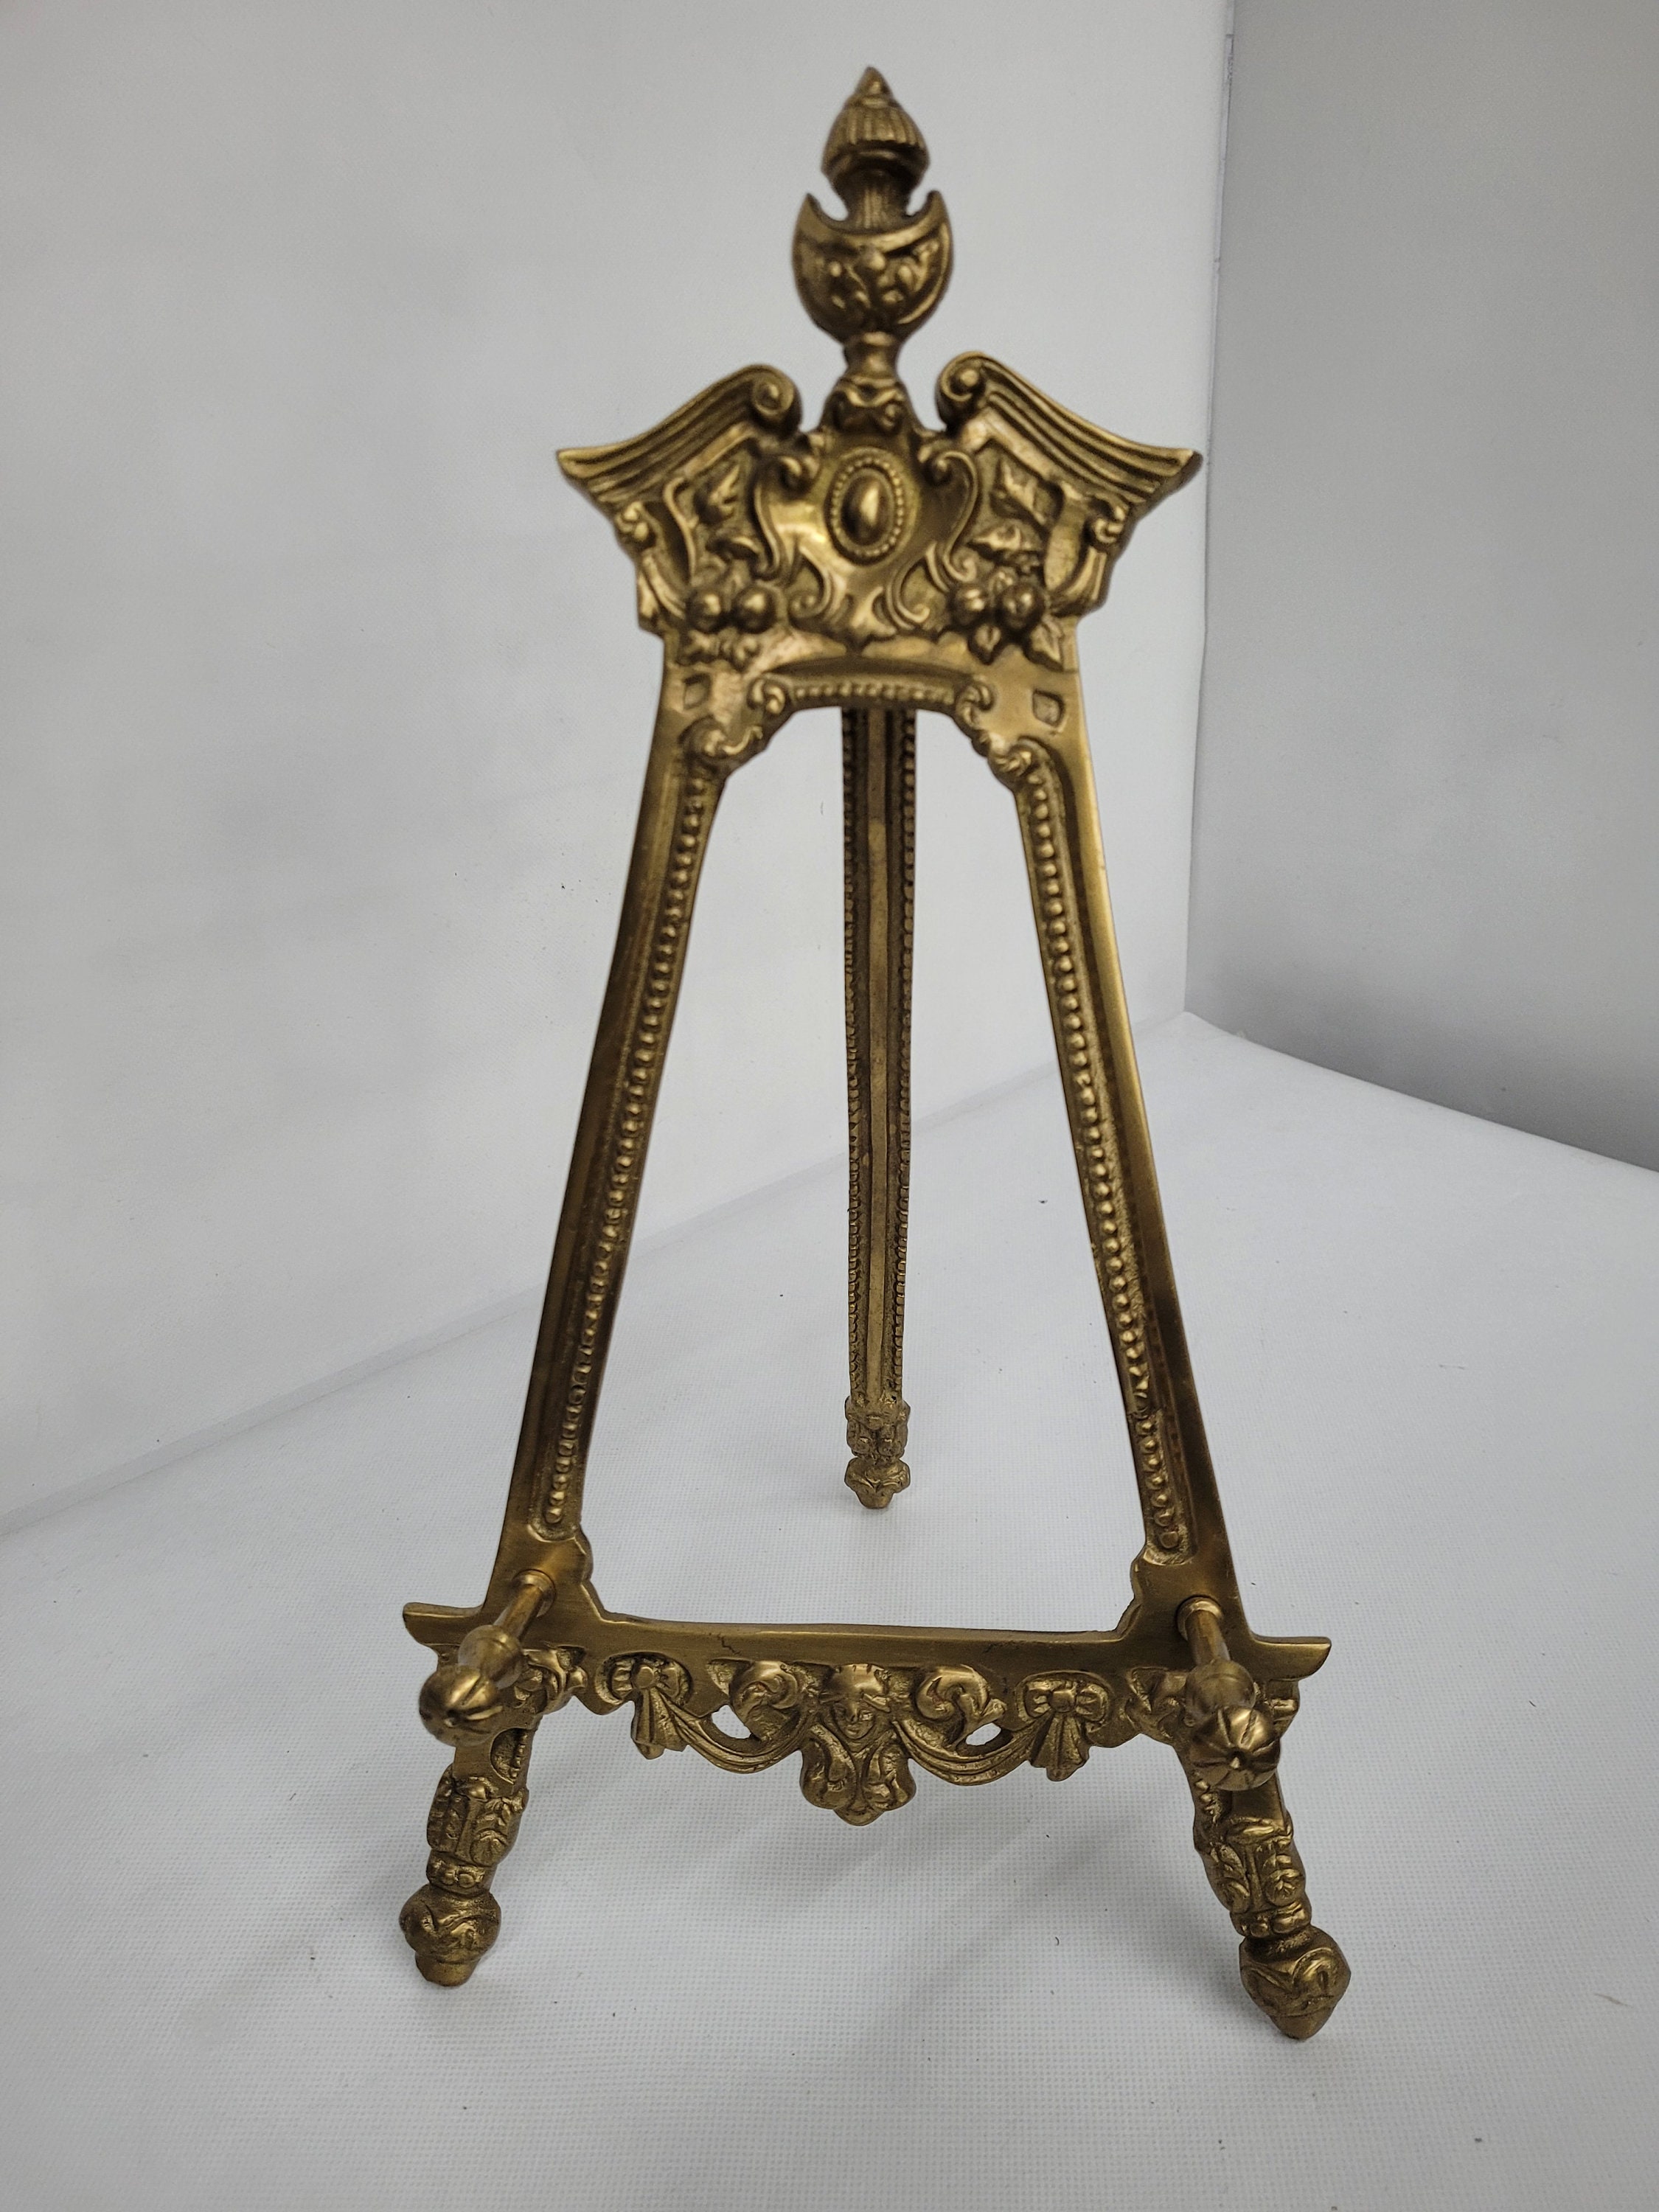 VTG SOLID BRASS 2 PIECE EASEL PLATE PICTURE ART DISPLAY STAND HOLDER  6.75”HX6.5”